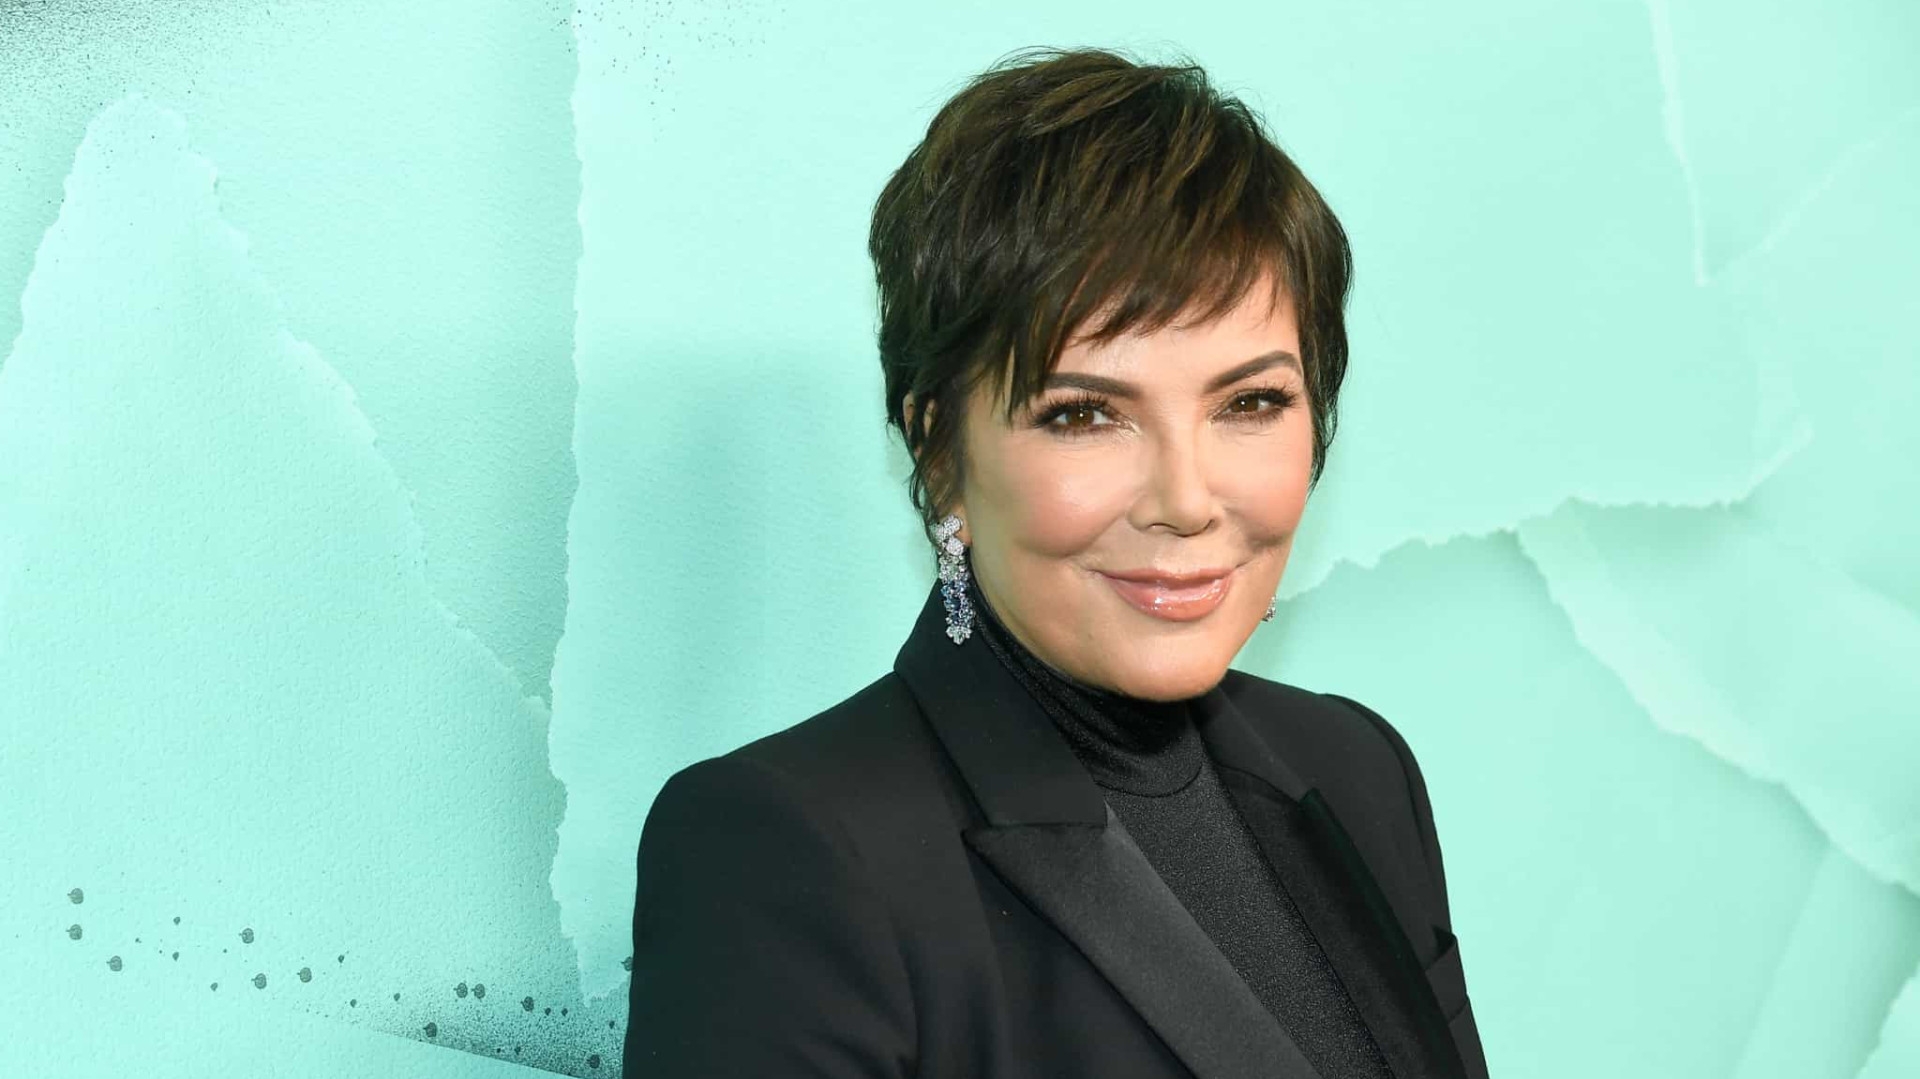 Kris Jenner opens up about cheating on her ex husband Robert